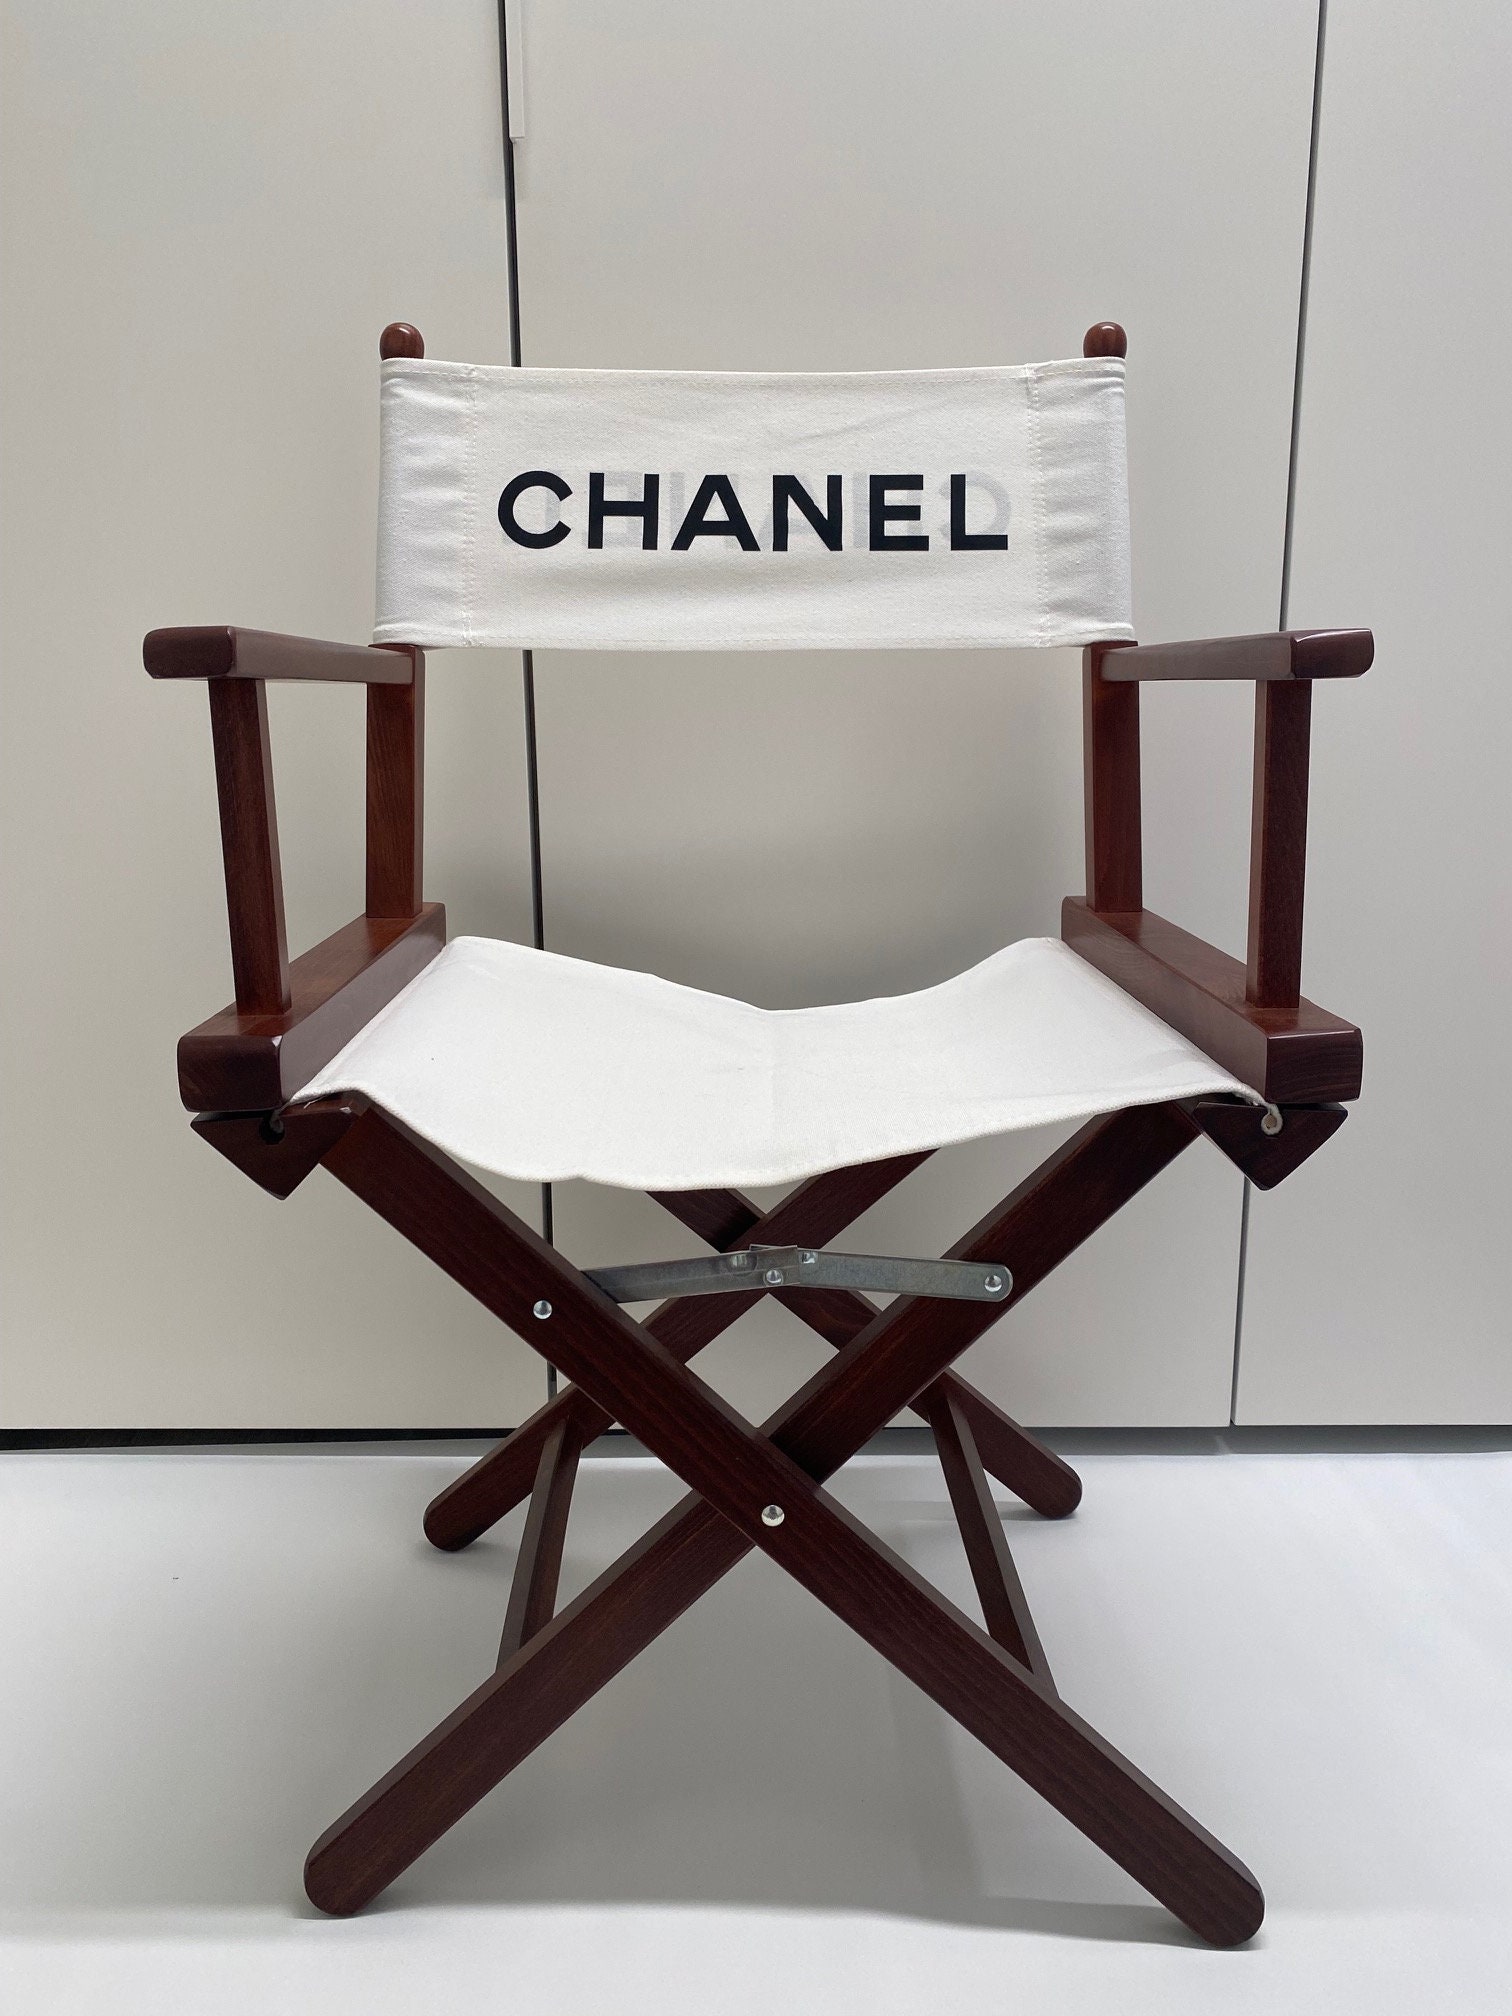 Chanel Vip Gift - 60+ Gift Ideas for 2023